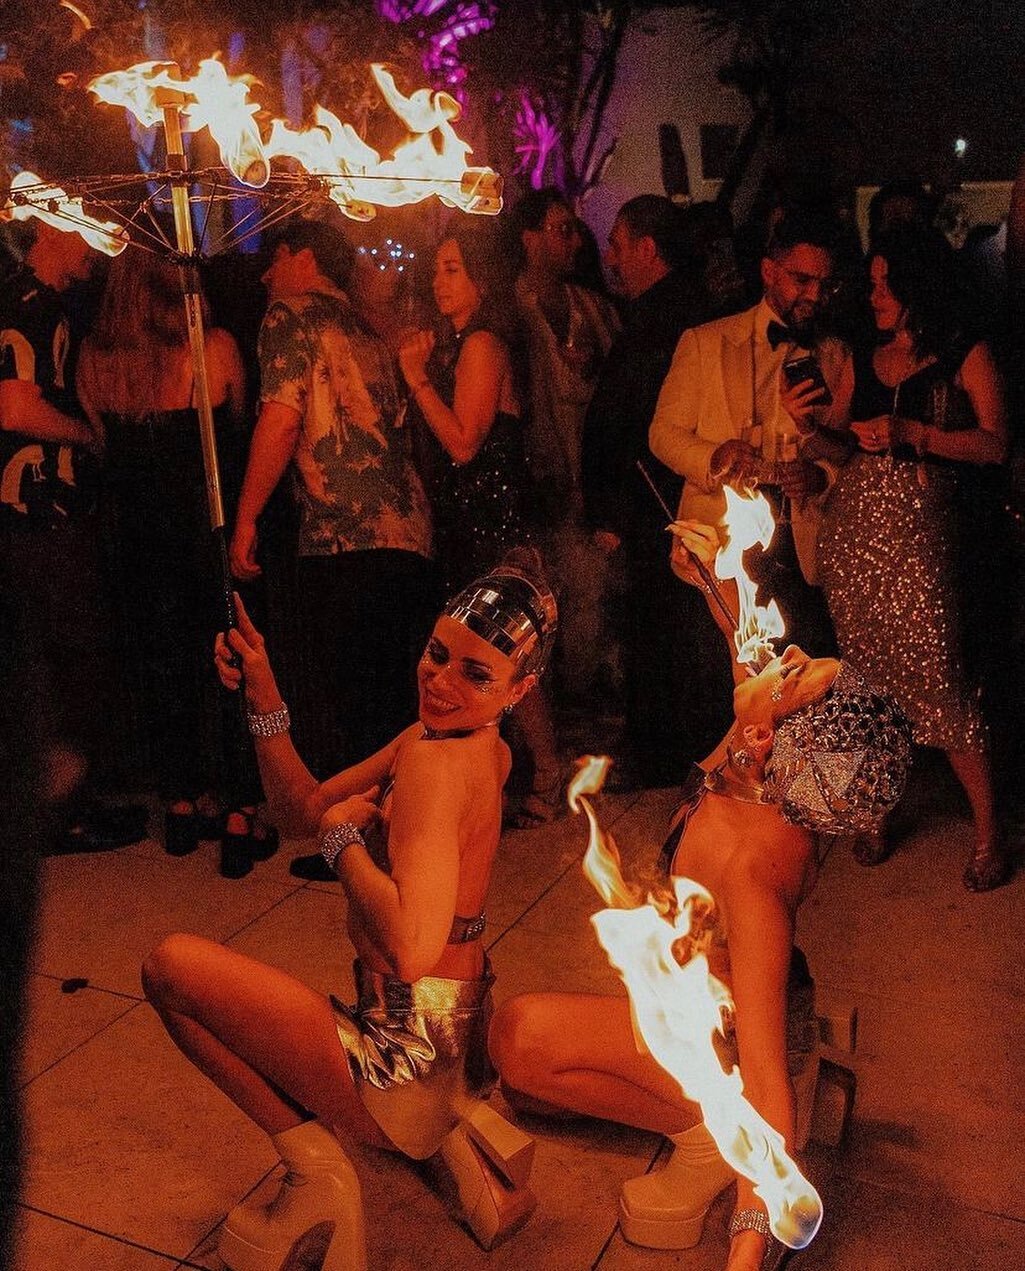 One more from New Years in Miami 🔥 Thank you @quixoticfusion and @momentumwego for such a fun evening! #fire #firedancer #fireeating